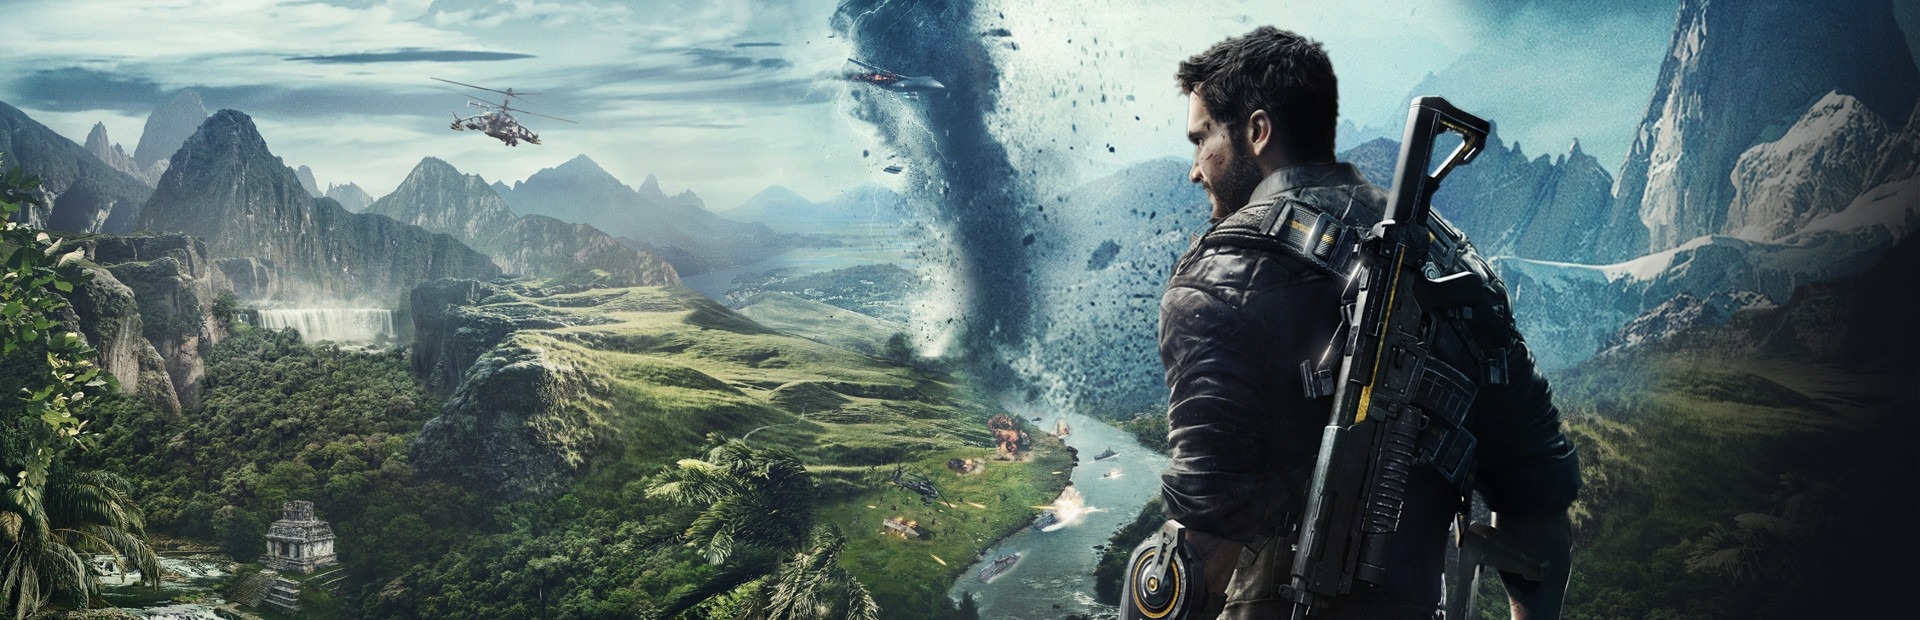 Just Cause 4 Complete Edition